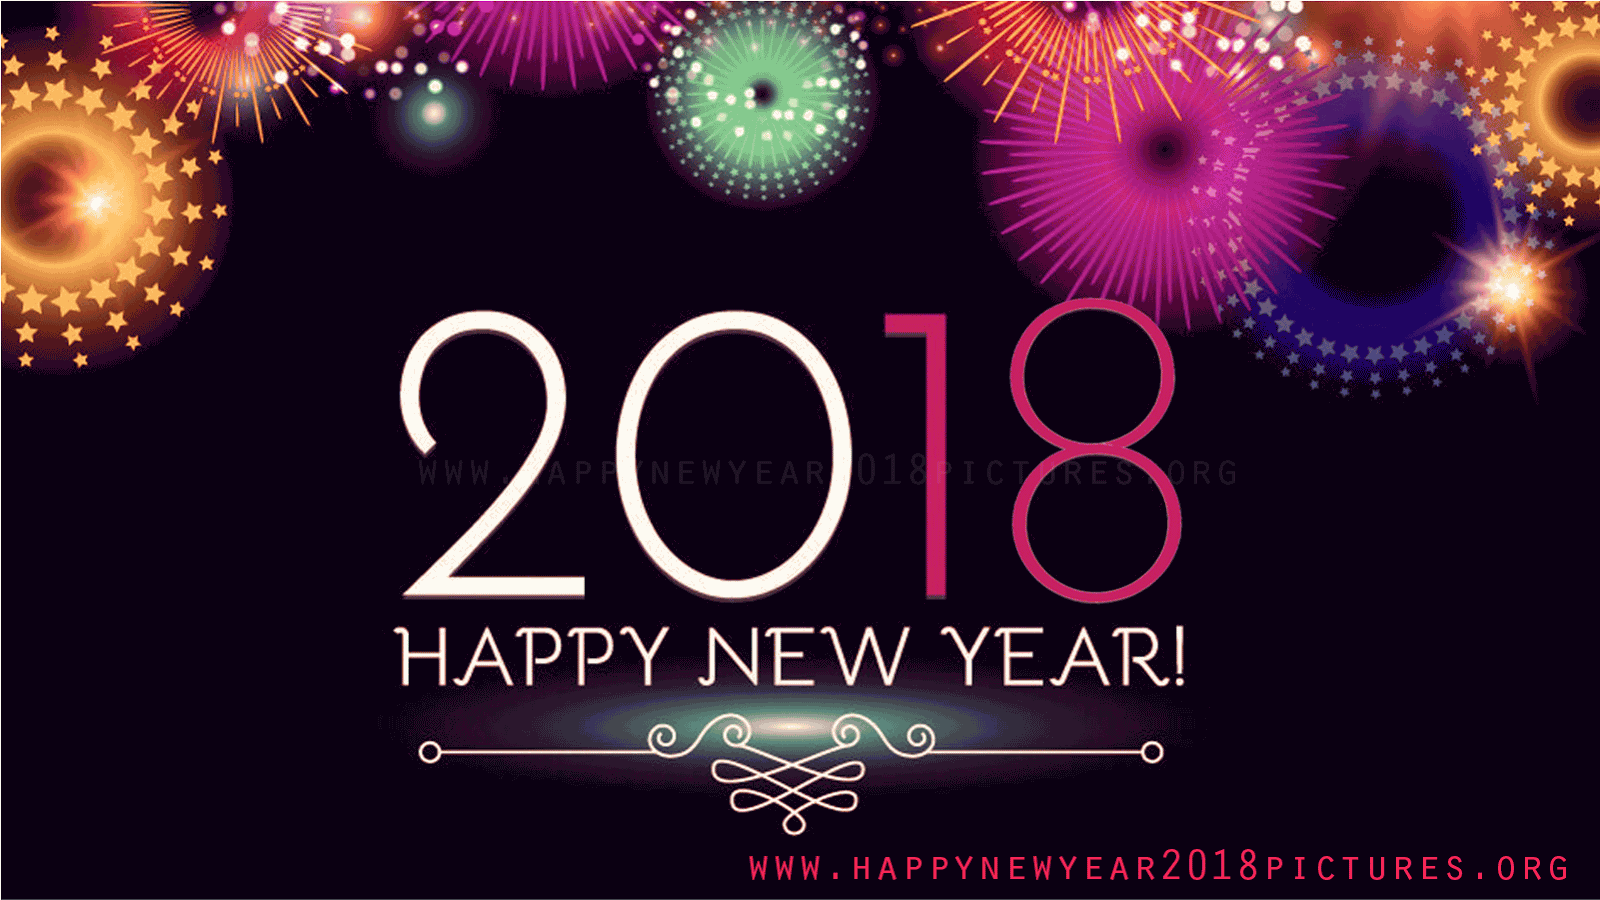 20 Amazing 2018 New Year Quotes & Wishes Photos